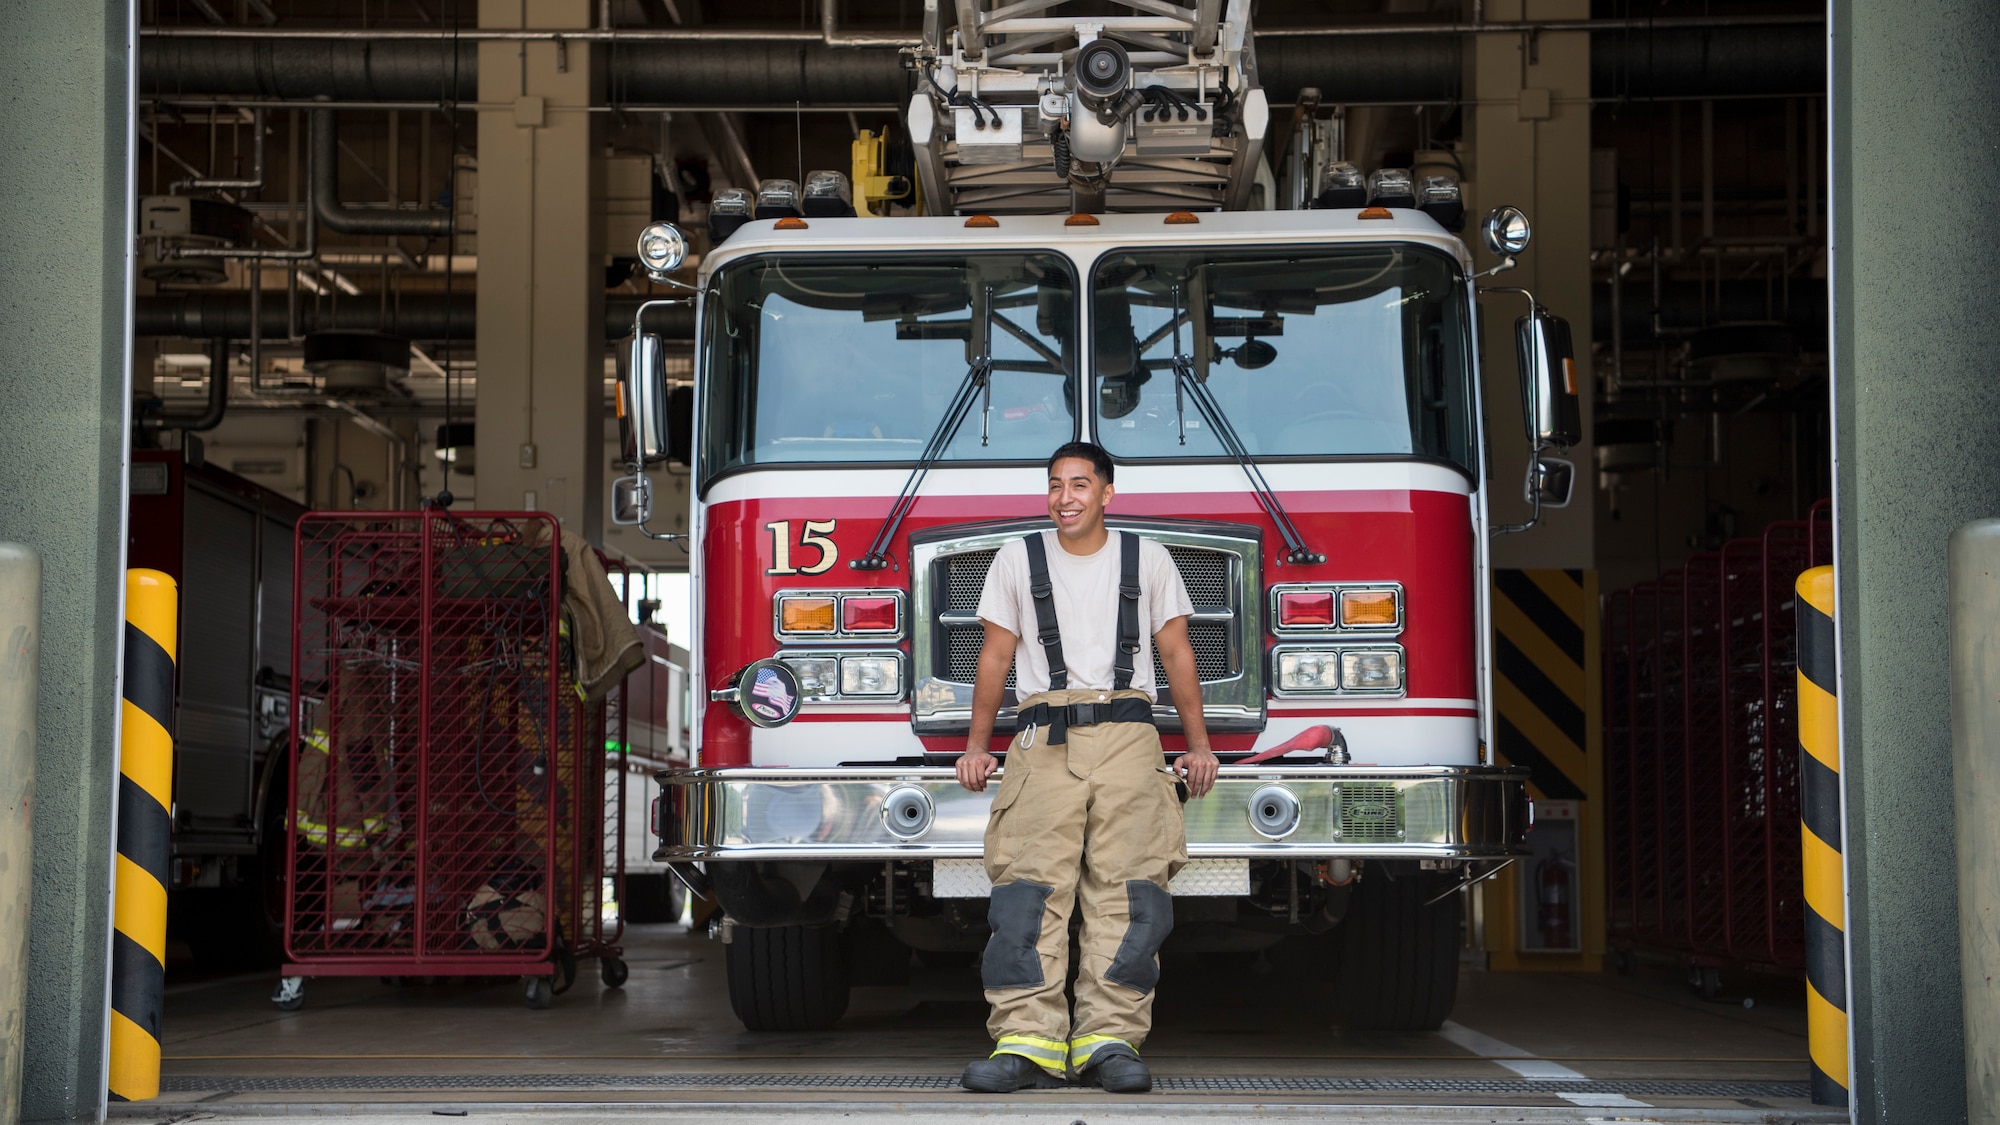 U.S. Air Force Airman 1st Class Adam Cardona, a 35th Civil Engineer fire protection journeyman, pauses for a photo in front of a fire truck at Misawa Air Base, Japan, Aug. 7, 2019. Cardona’s leadership makes training exercises a top priority due to the base’s location, enhancing his professional growth. (U.S. Air Force photo by Senior Airman Collette Brooks)